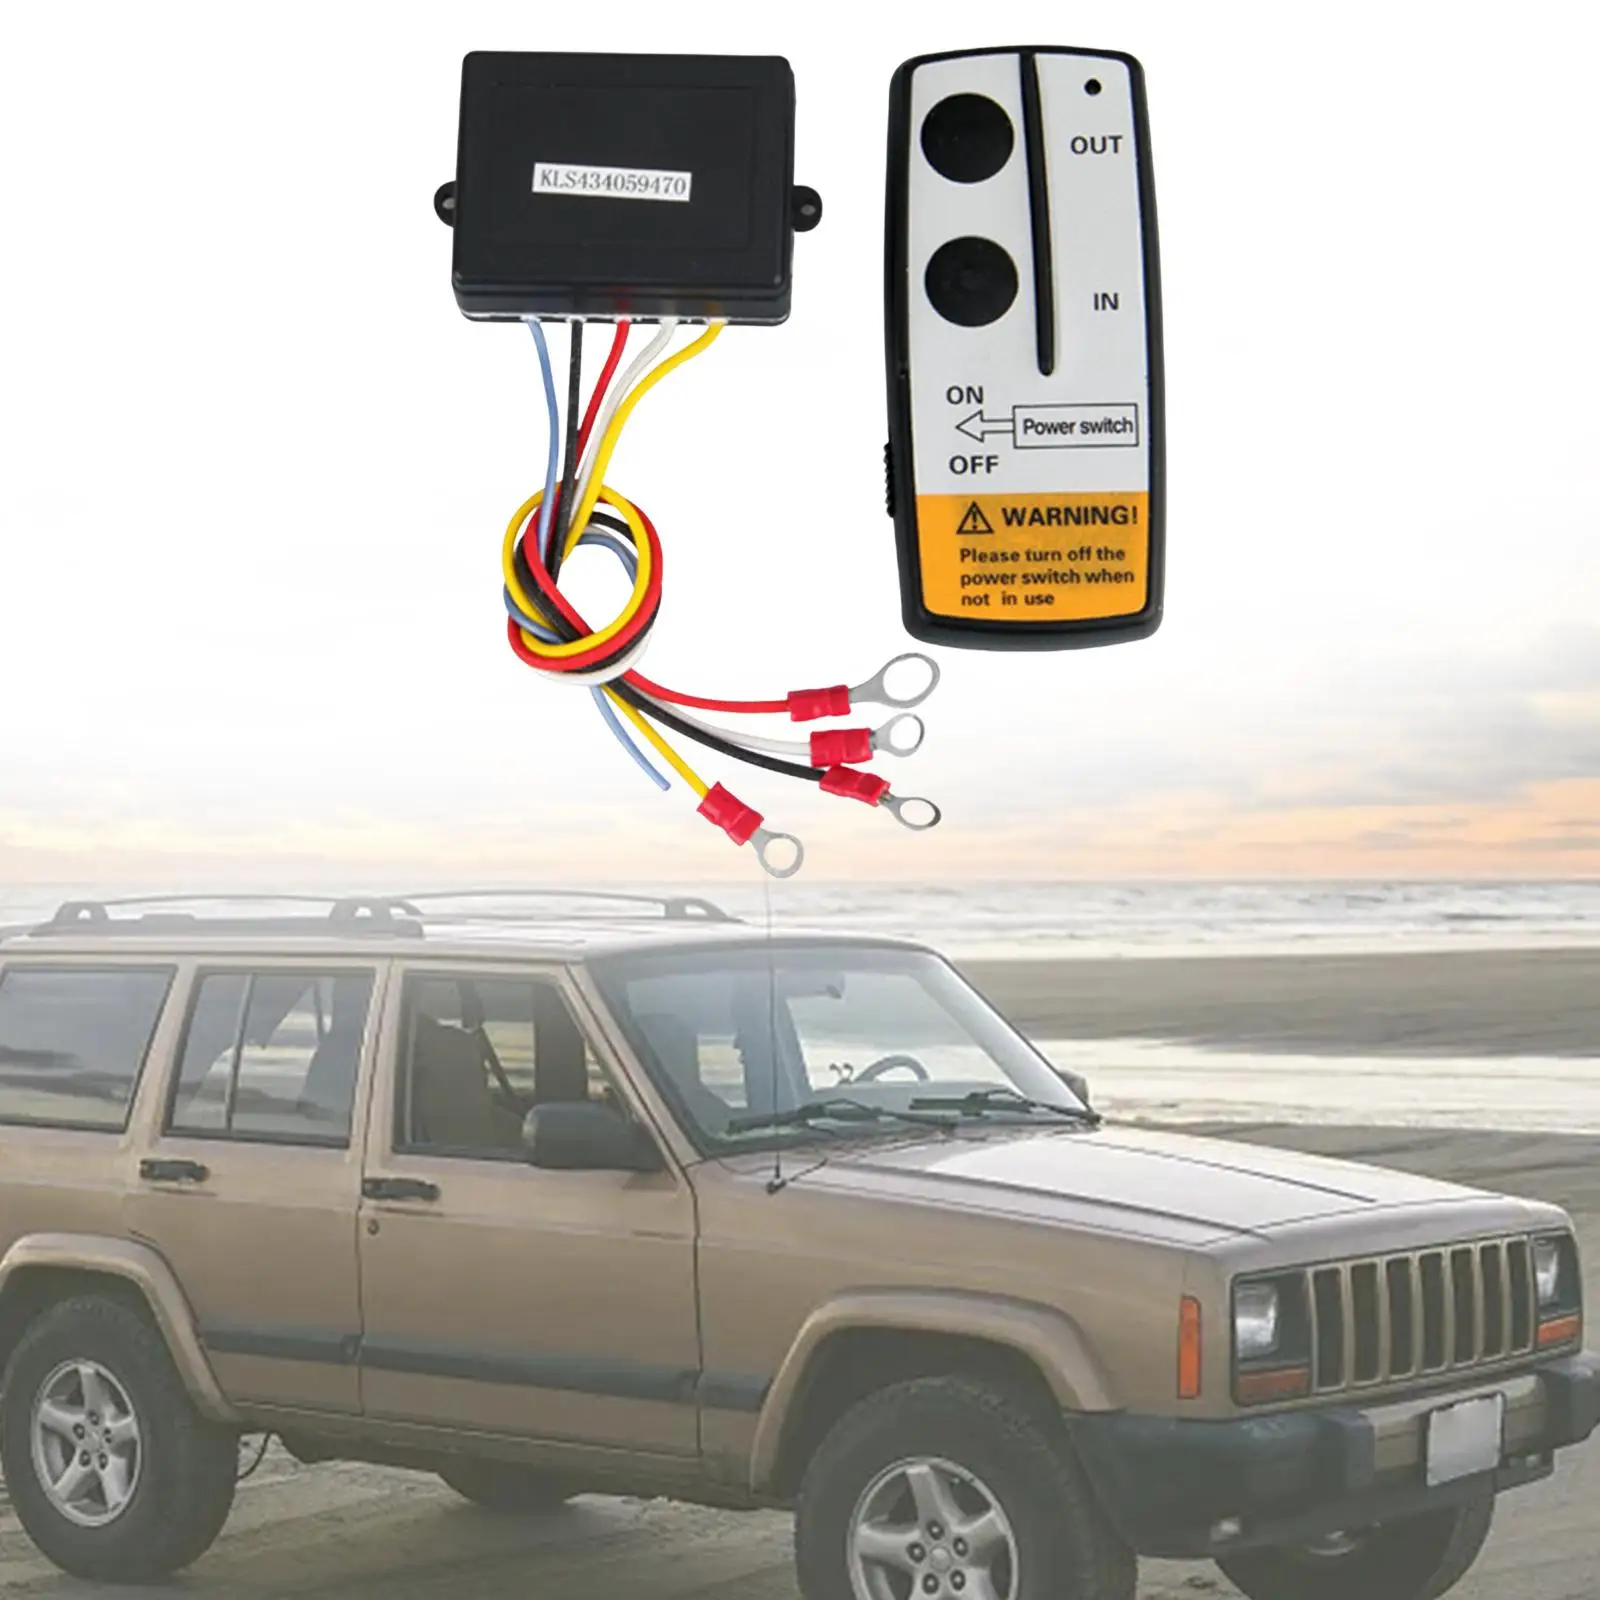 Waterproof 12V Winch Remote Control Kit for UTV ATV SUV - Compact and Easy-to- - $22.88